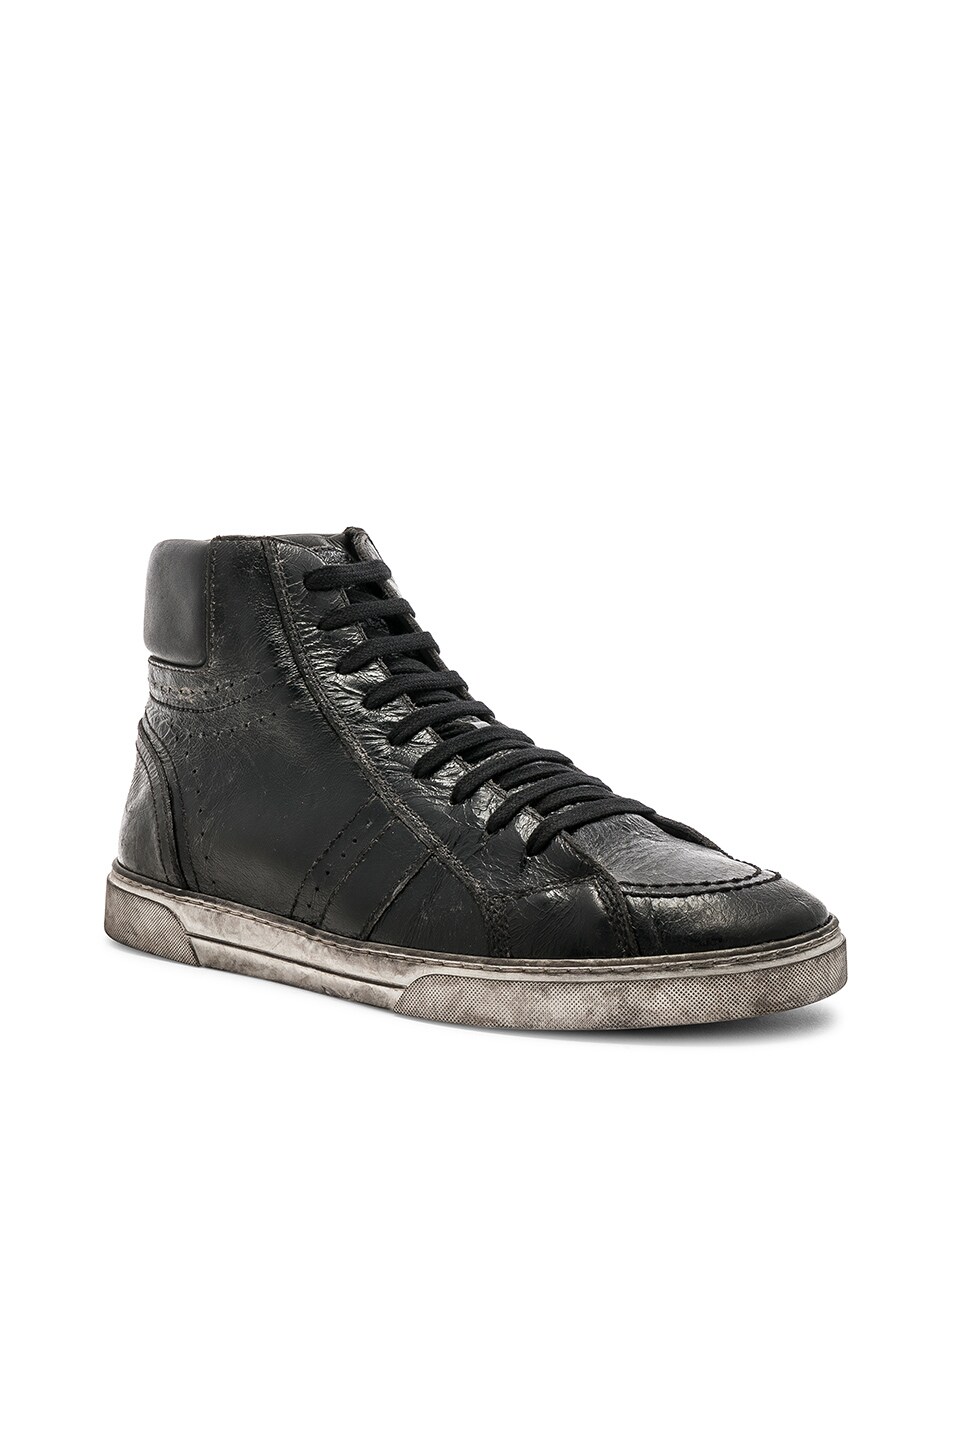 Image 1 of Saint Laurent Leather High-Top Sneakers in Black